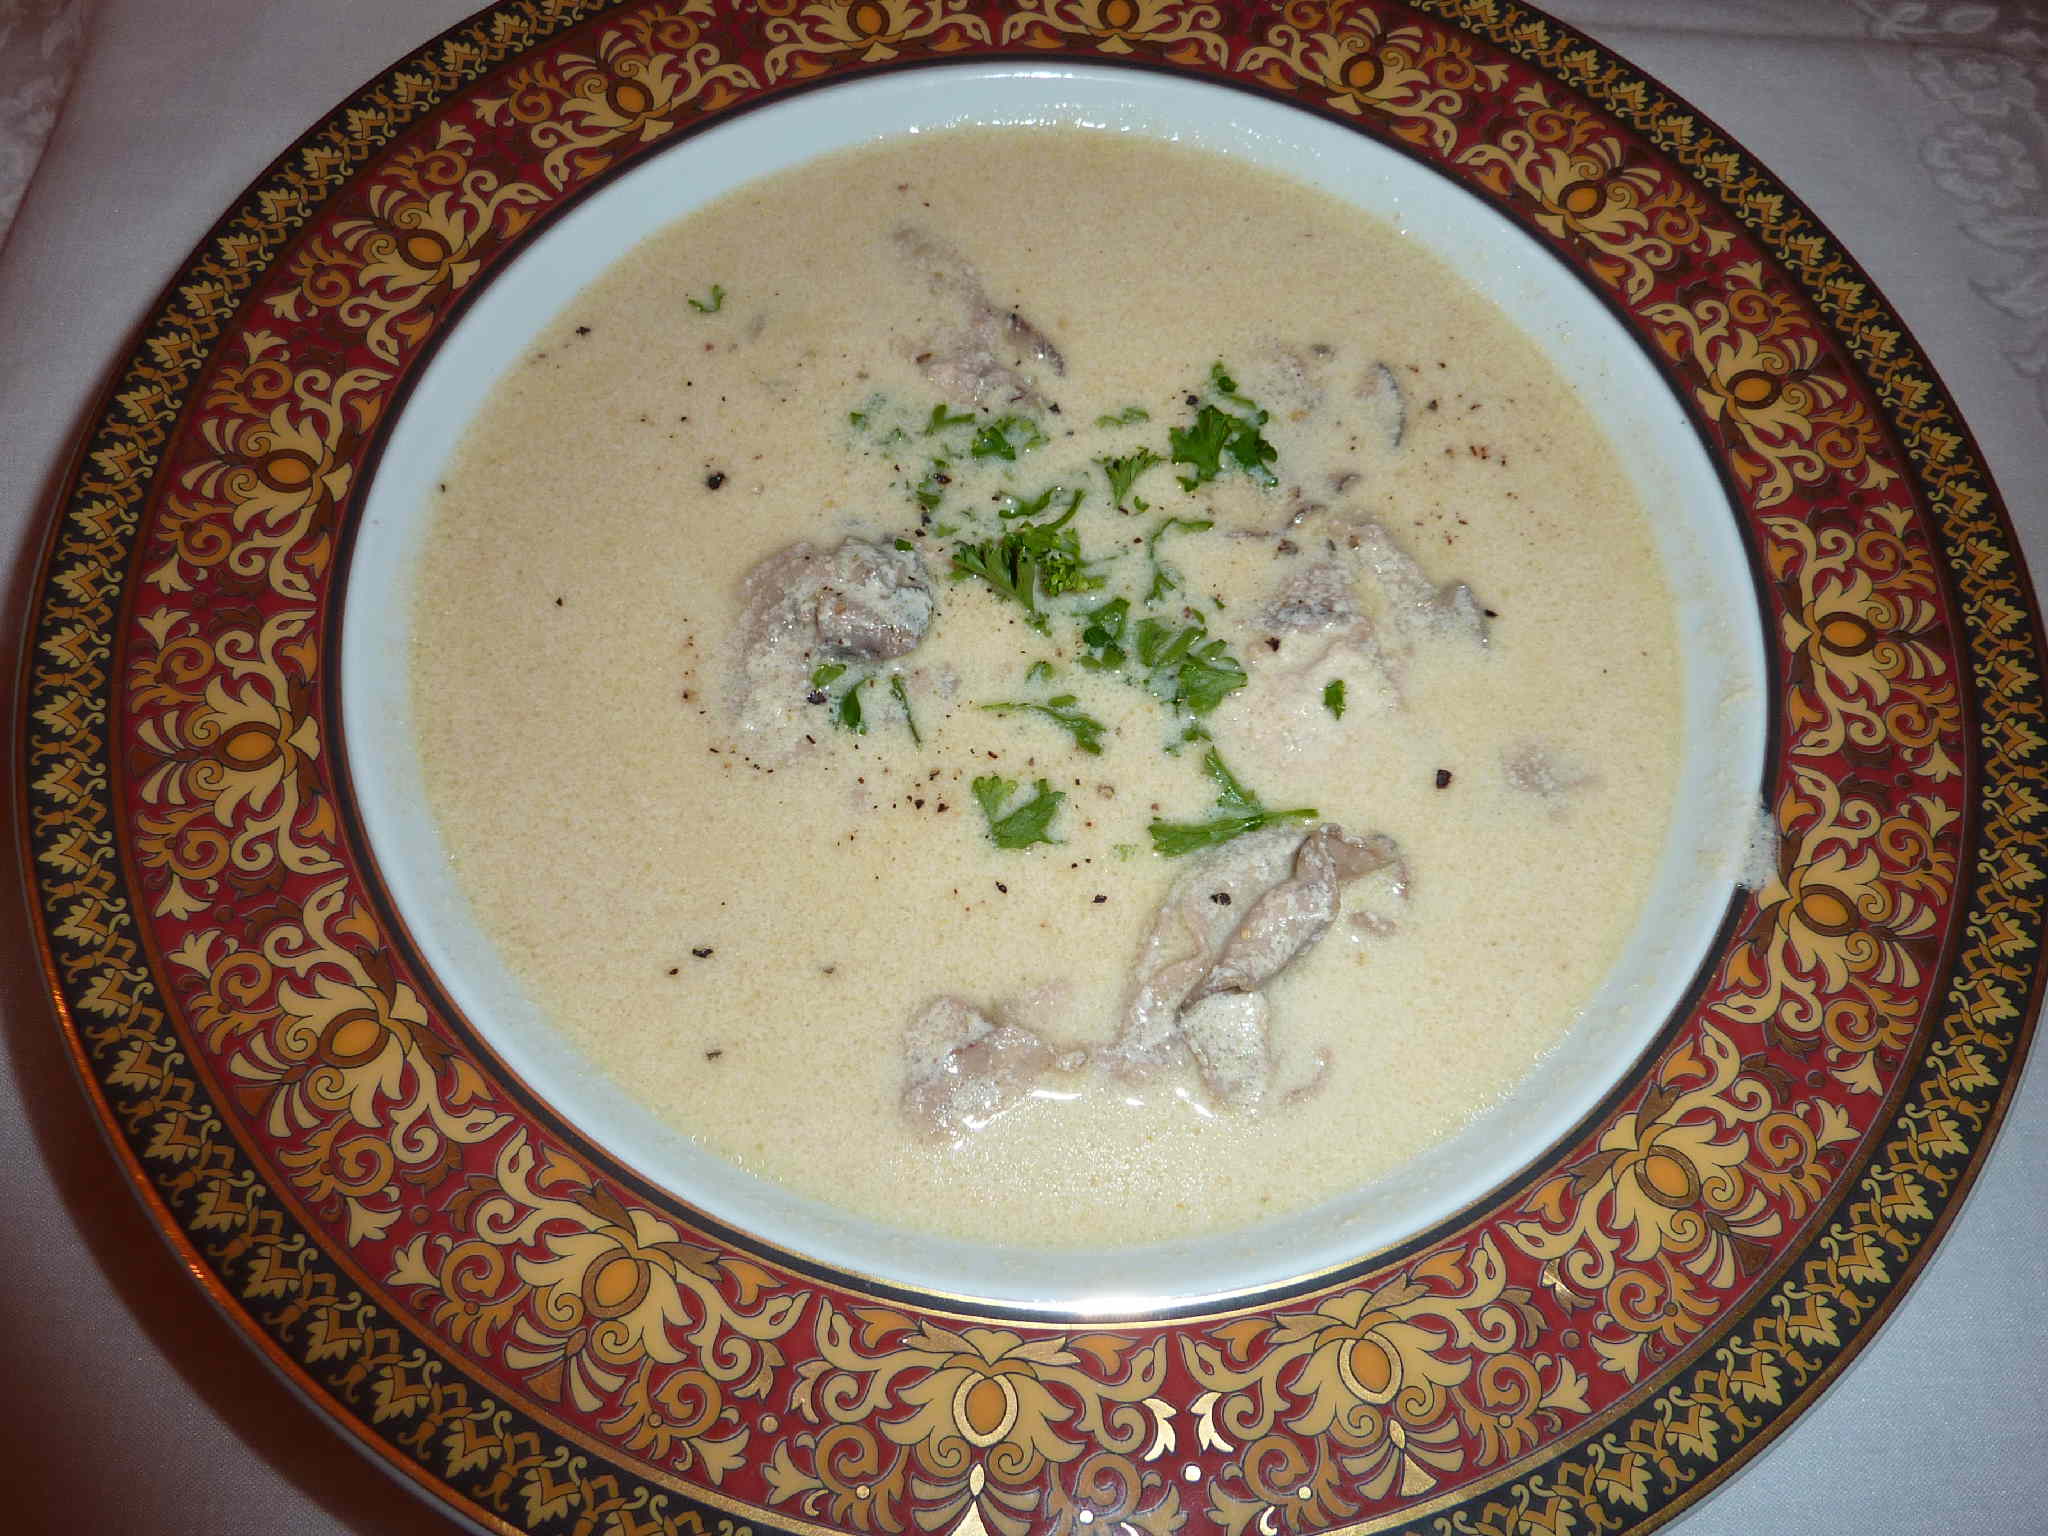 https://louisiana.kitchenandculture.com/sites/default/files/recipes/Louisiana%20Kitchen%20%26amp%3B%20Culture/oyster-stew.jpg